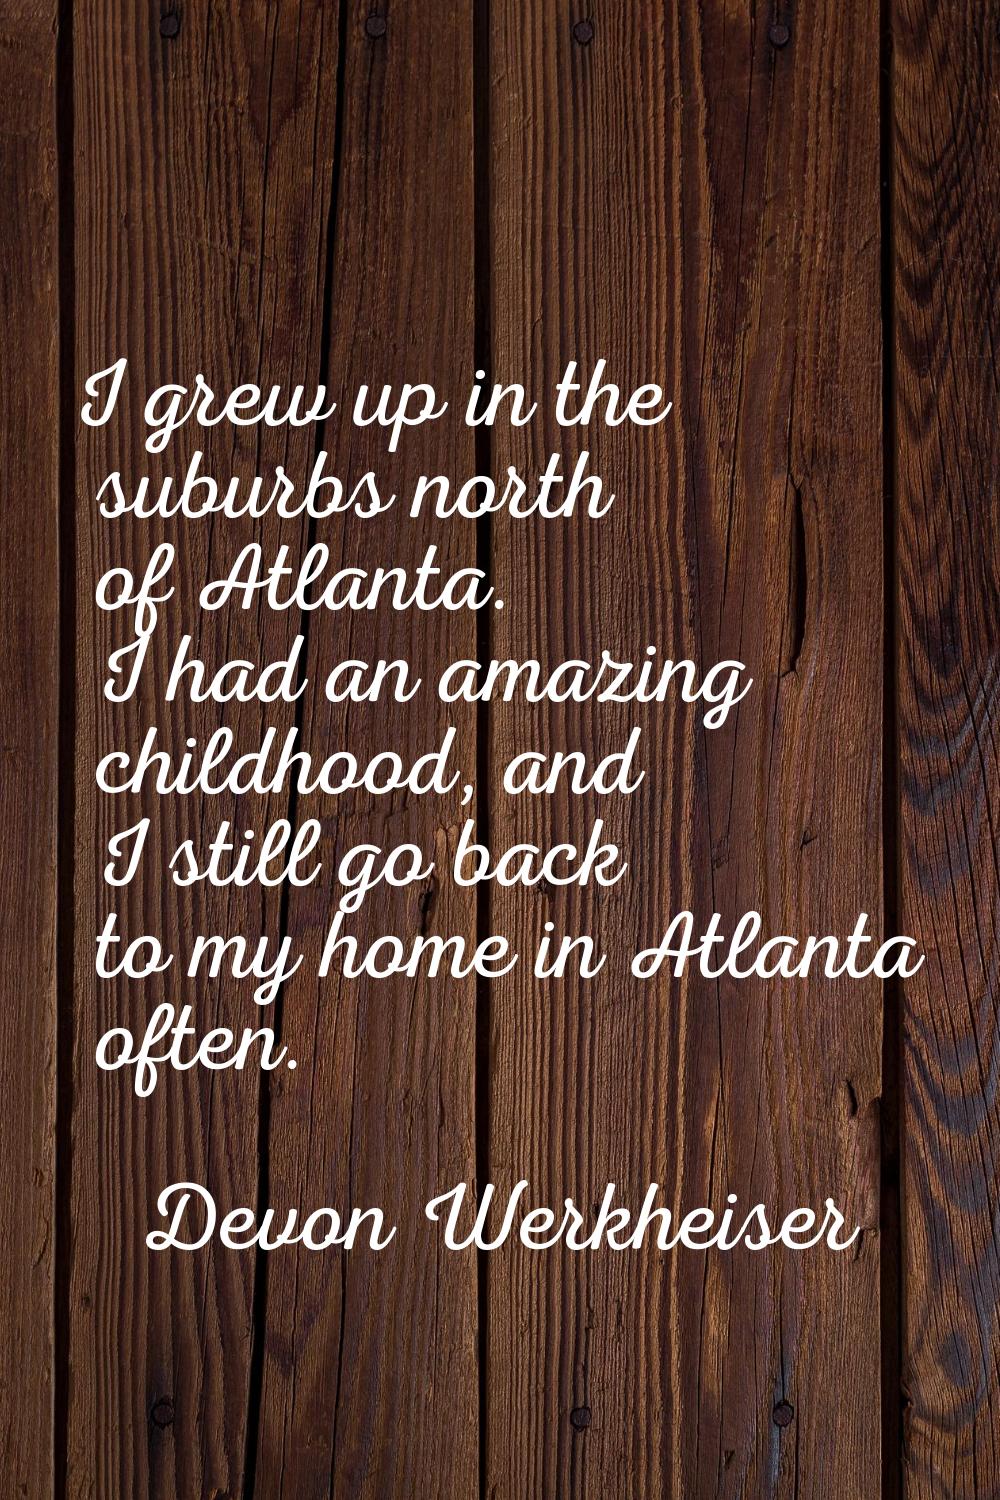 I grew up in the suburbs north of Atlanta. I had an amazing childhood, and I still go back to my ho